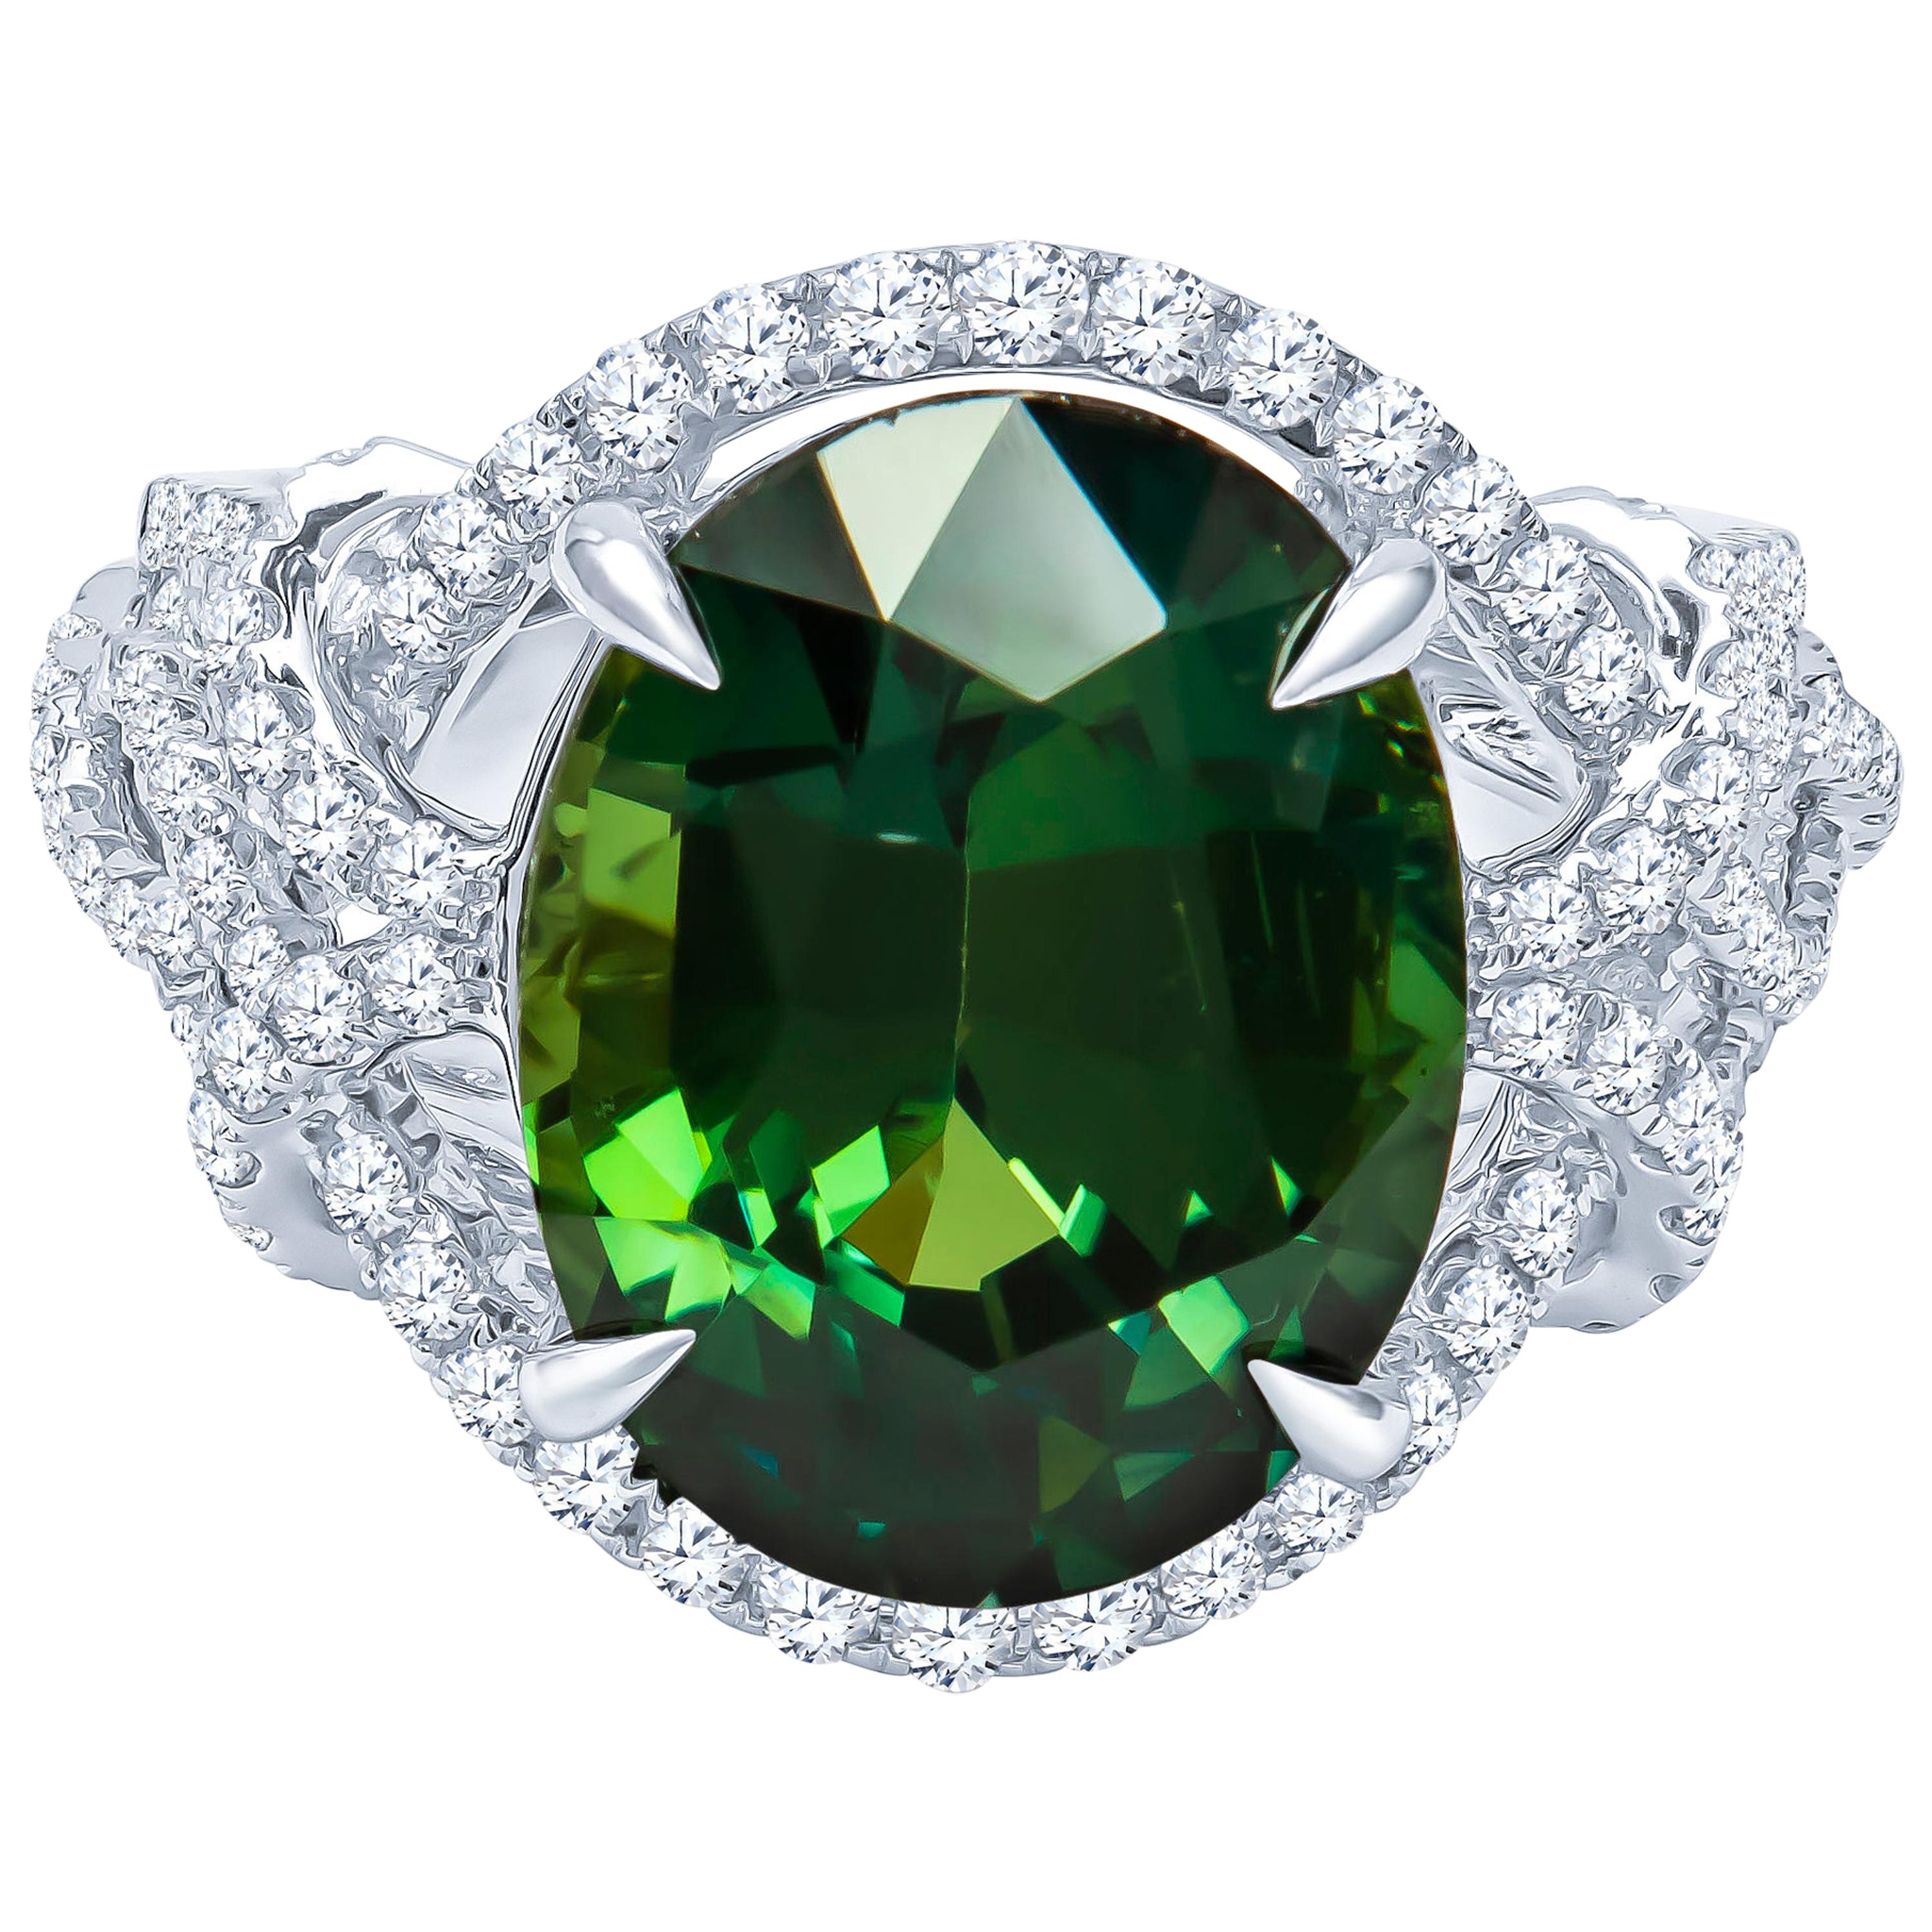 11.18 Carat Natural Oval Cut Green Sapphire 'GRS' in a 0.80 Carat Diamond Ring For Sale